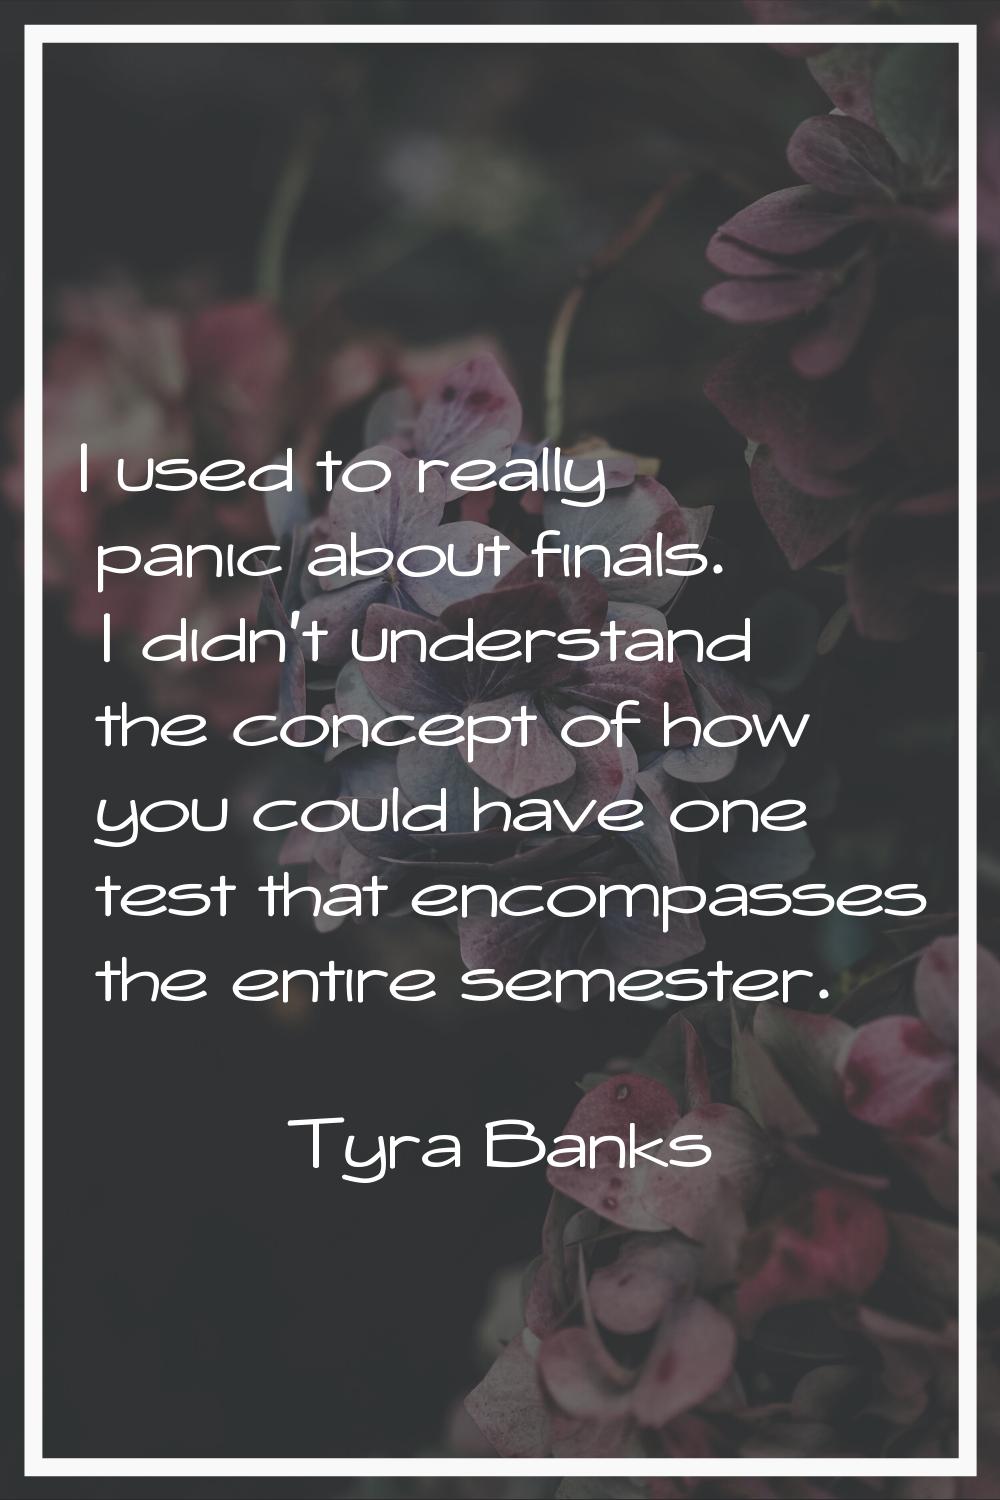 I used to really panic about finals. I didn't understand the concept of how you could have one test